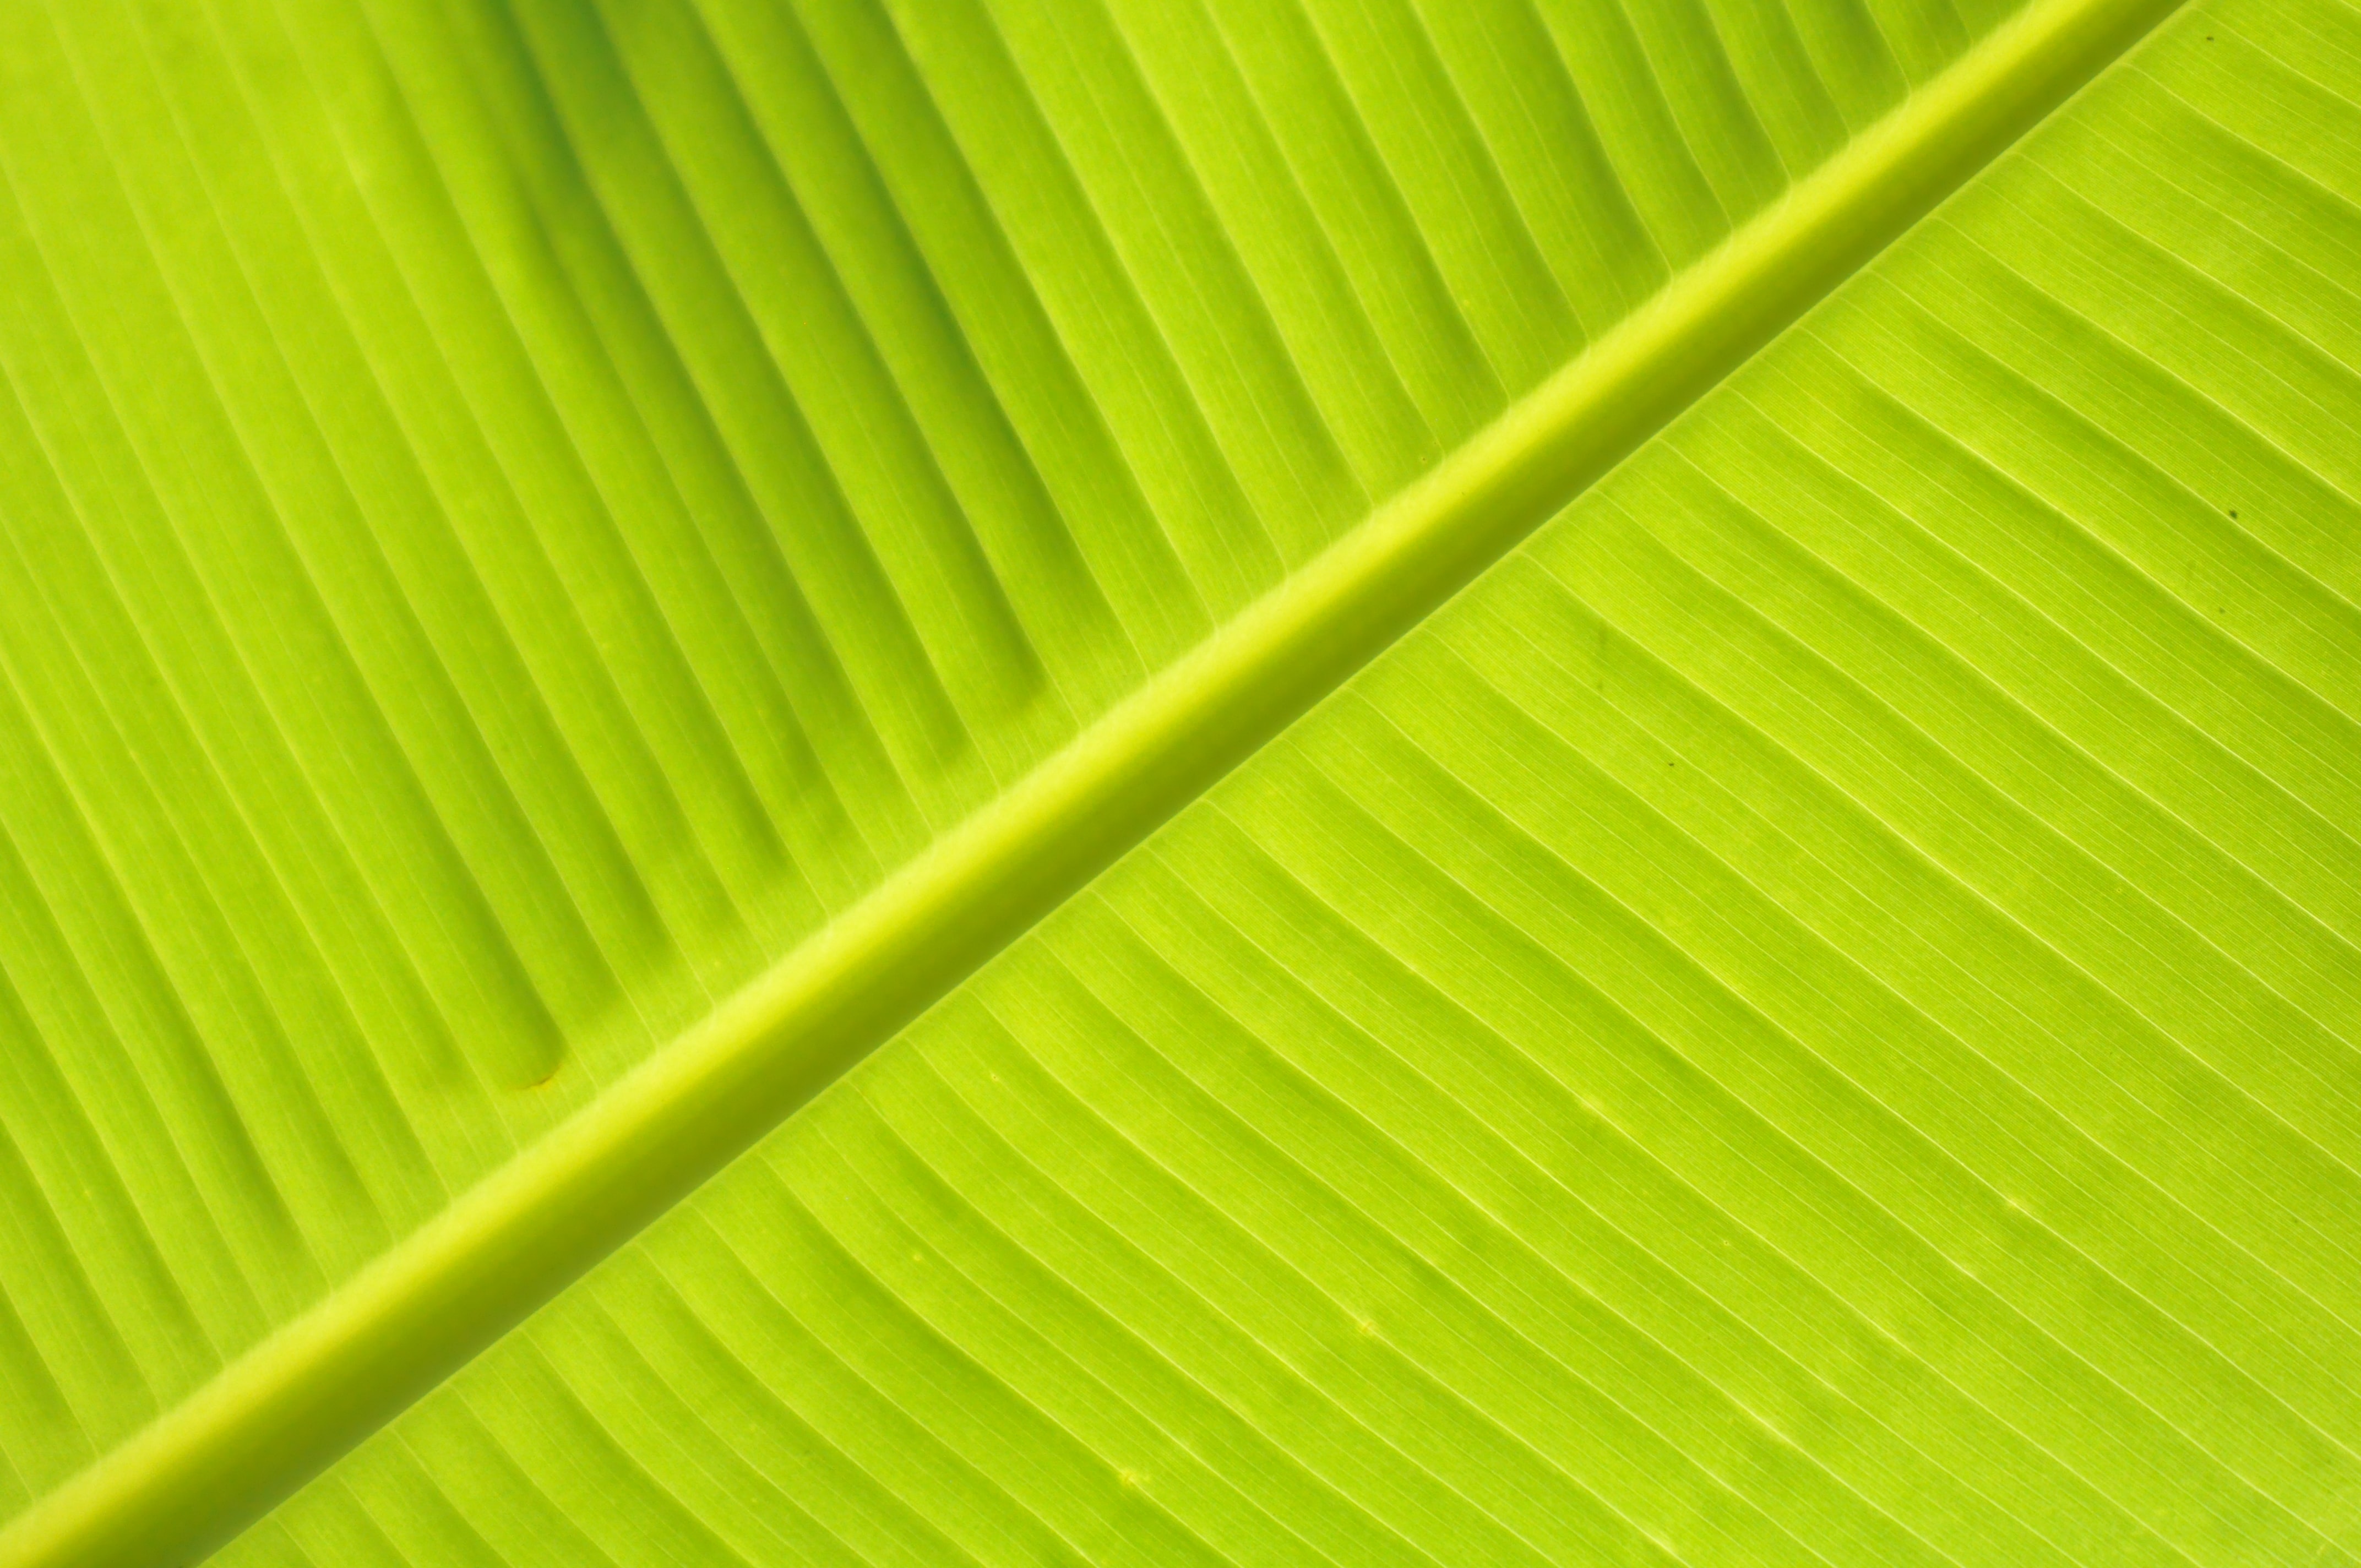 52461 download wallpaper stripes, green, plant, macro, sheet, leaf, streaks, veins screensavers and pictures for free